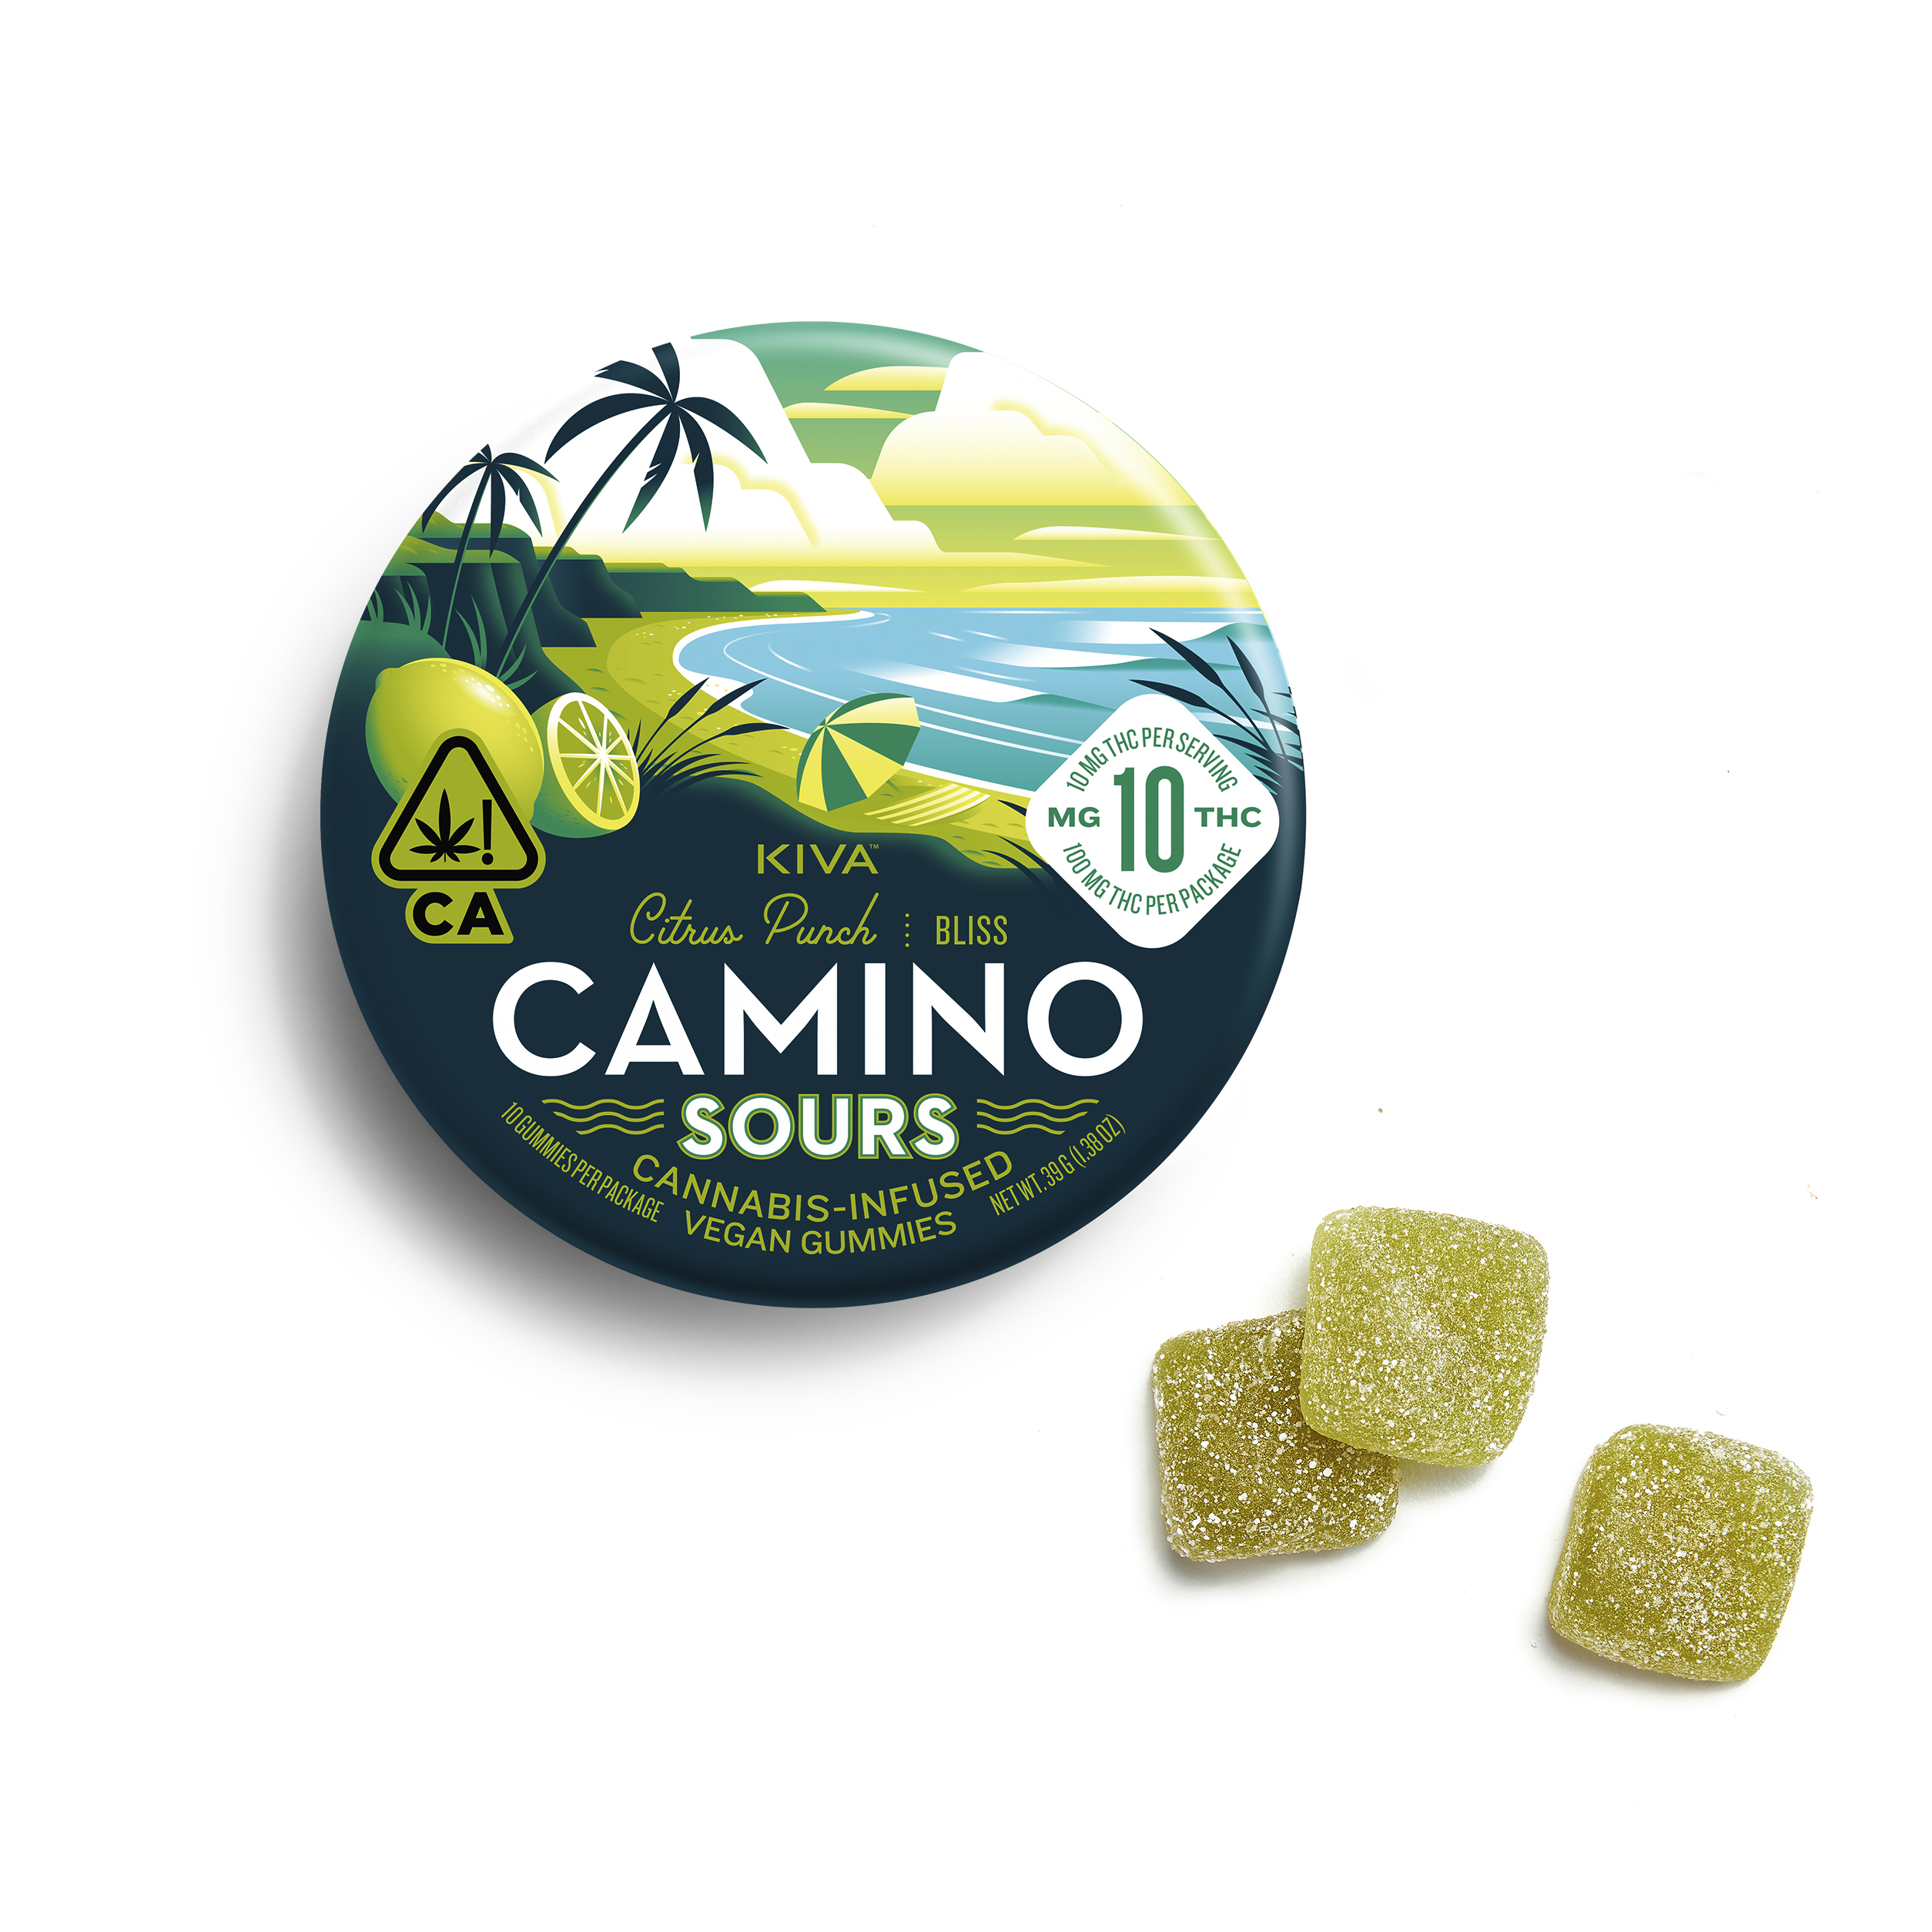 A photograph of Camino Sours Citrus Punch (100mg/10ct)